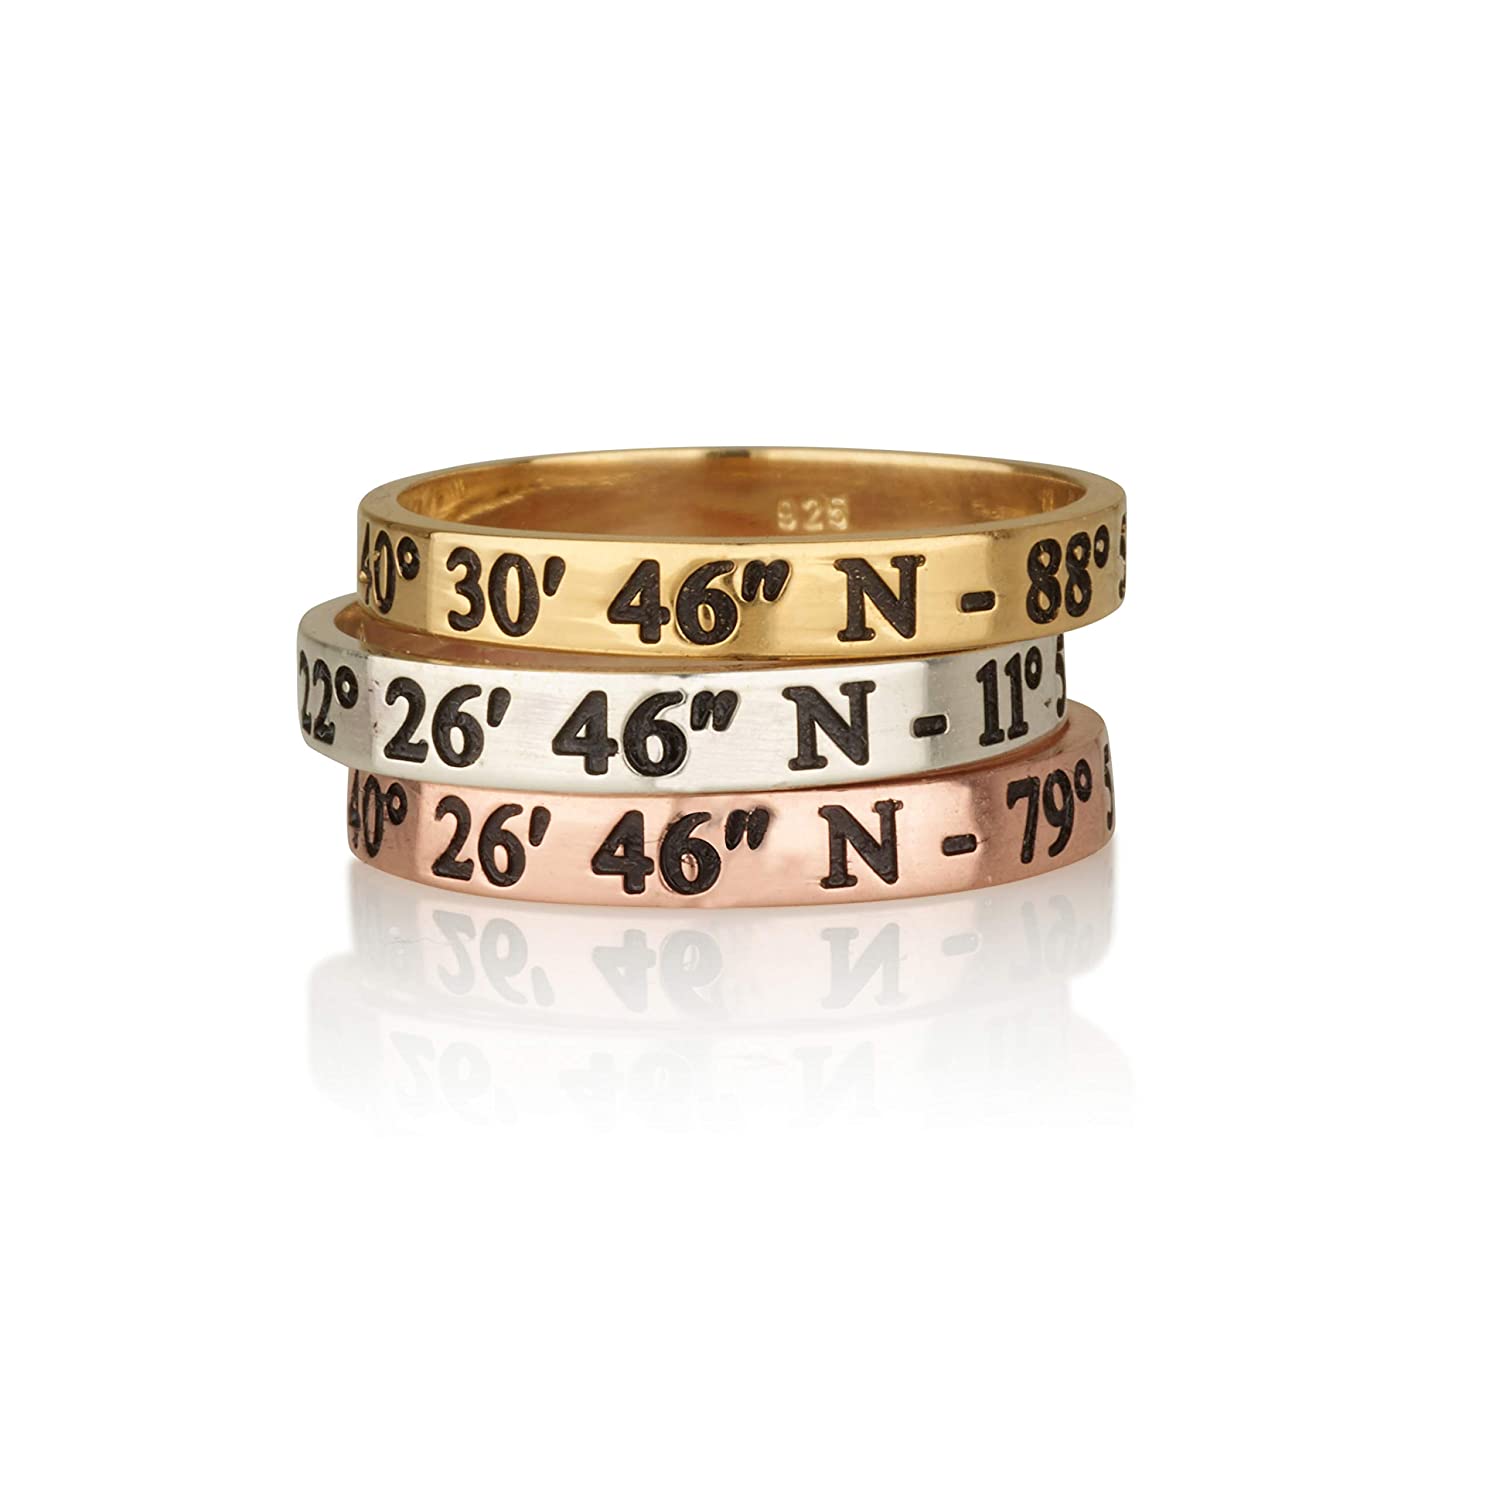 Dainty Coordinates Ring - Custom Coordinates Ring - Personalized Latitude Longitude Jewelry - Thin Stackable Band Ring R72